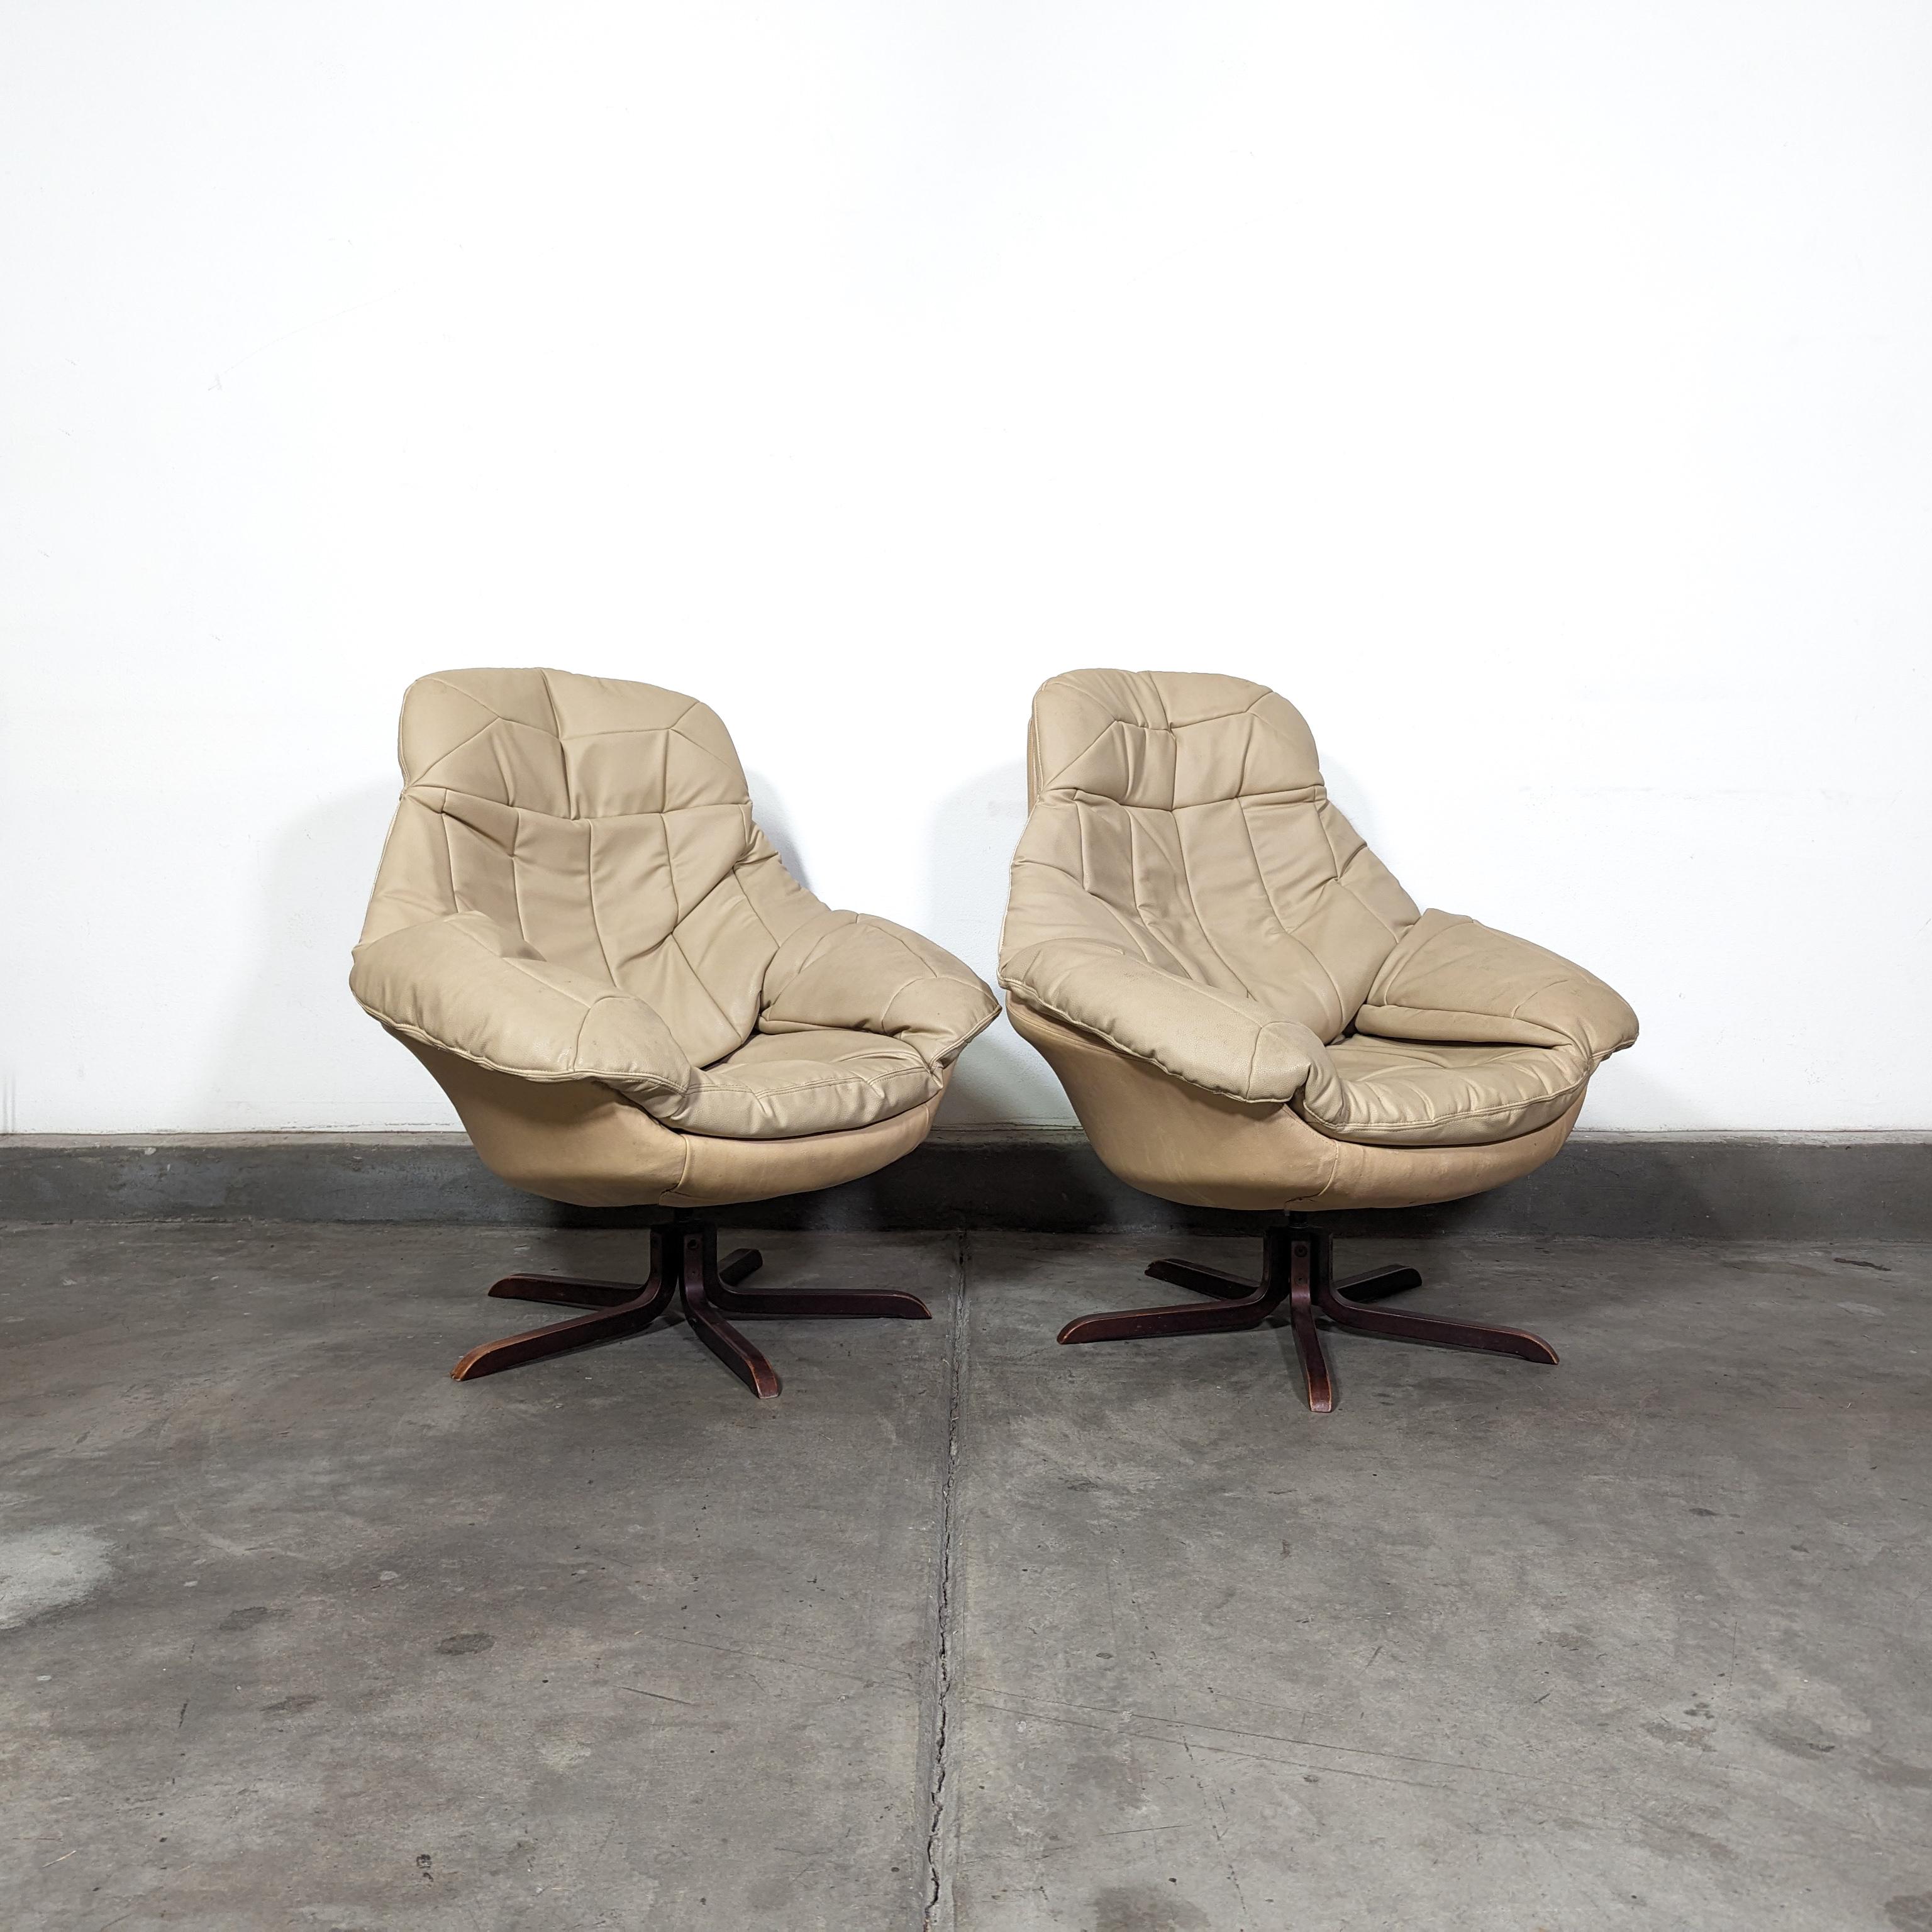 Mid Century Modern Swivel Leather Lounge Chairs by H.W. Klein for Bramin, c1970s For Sale 2